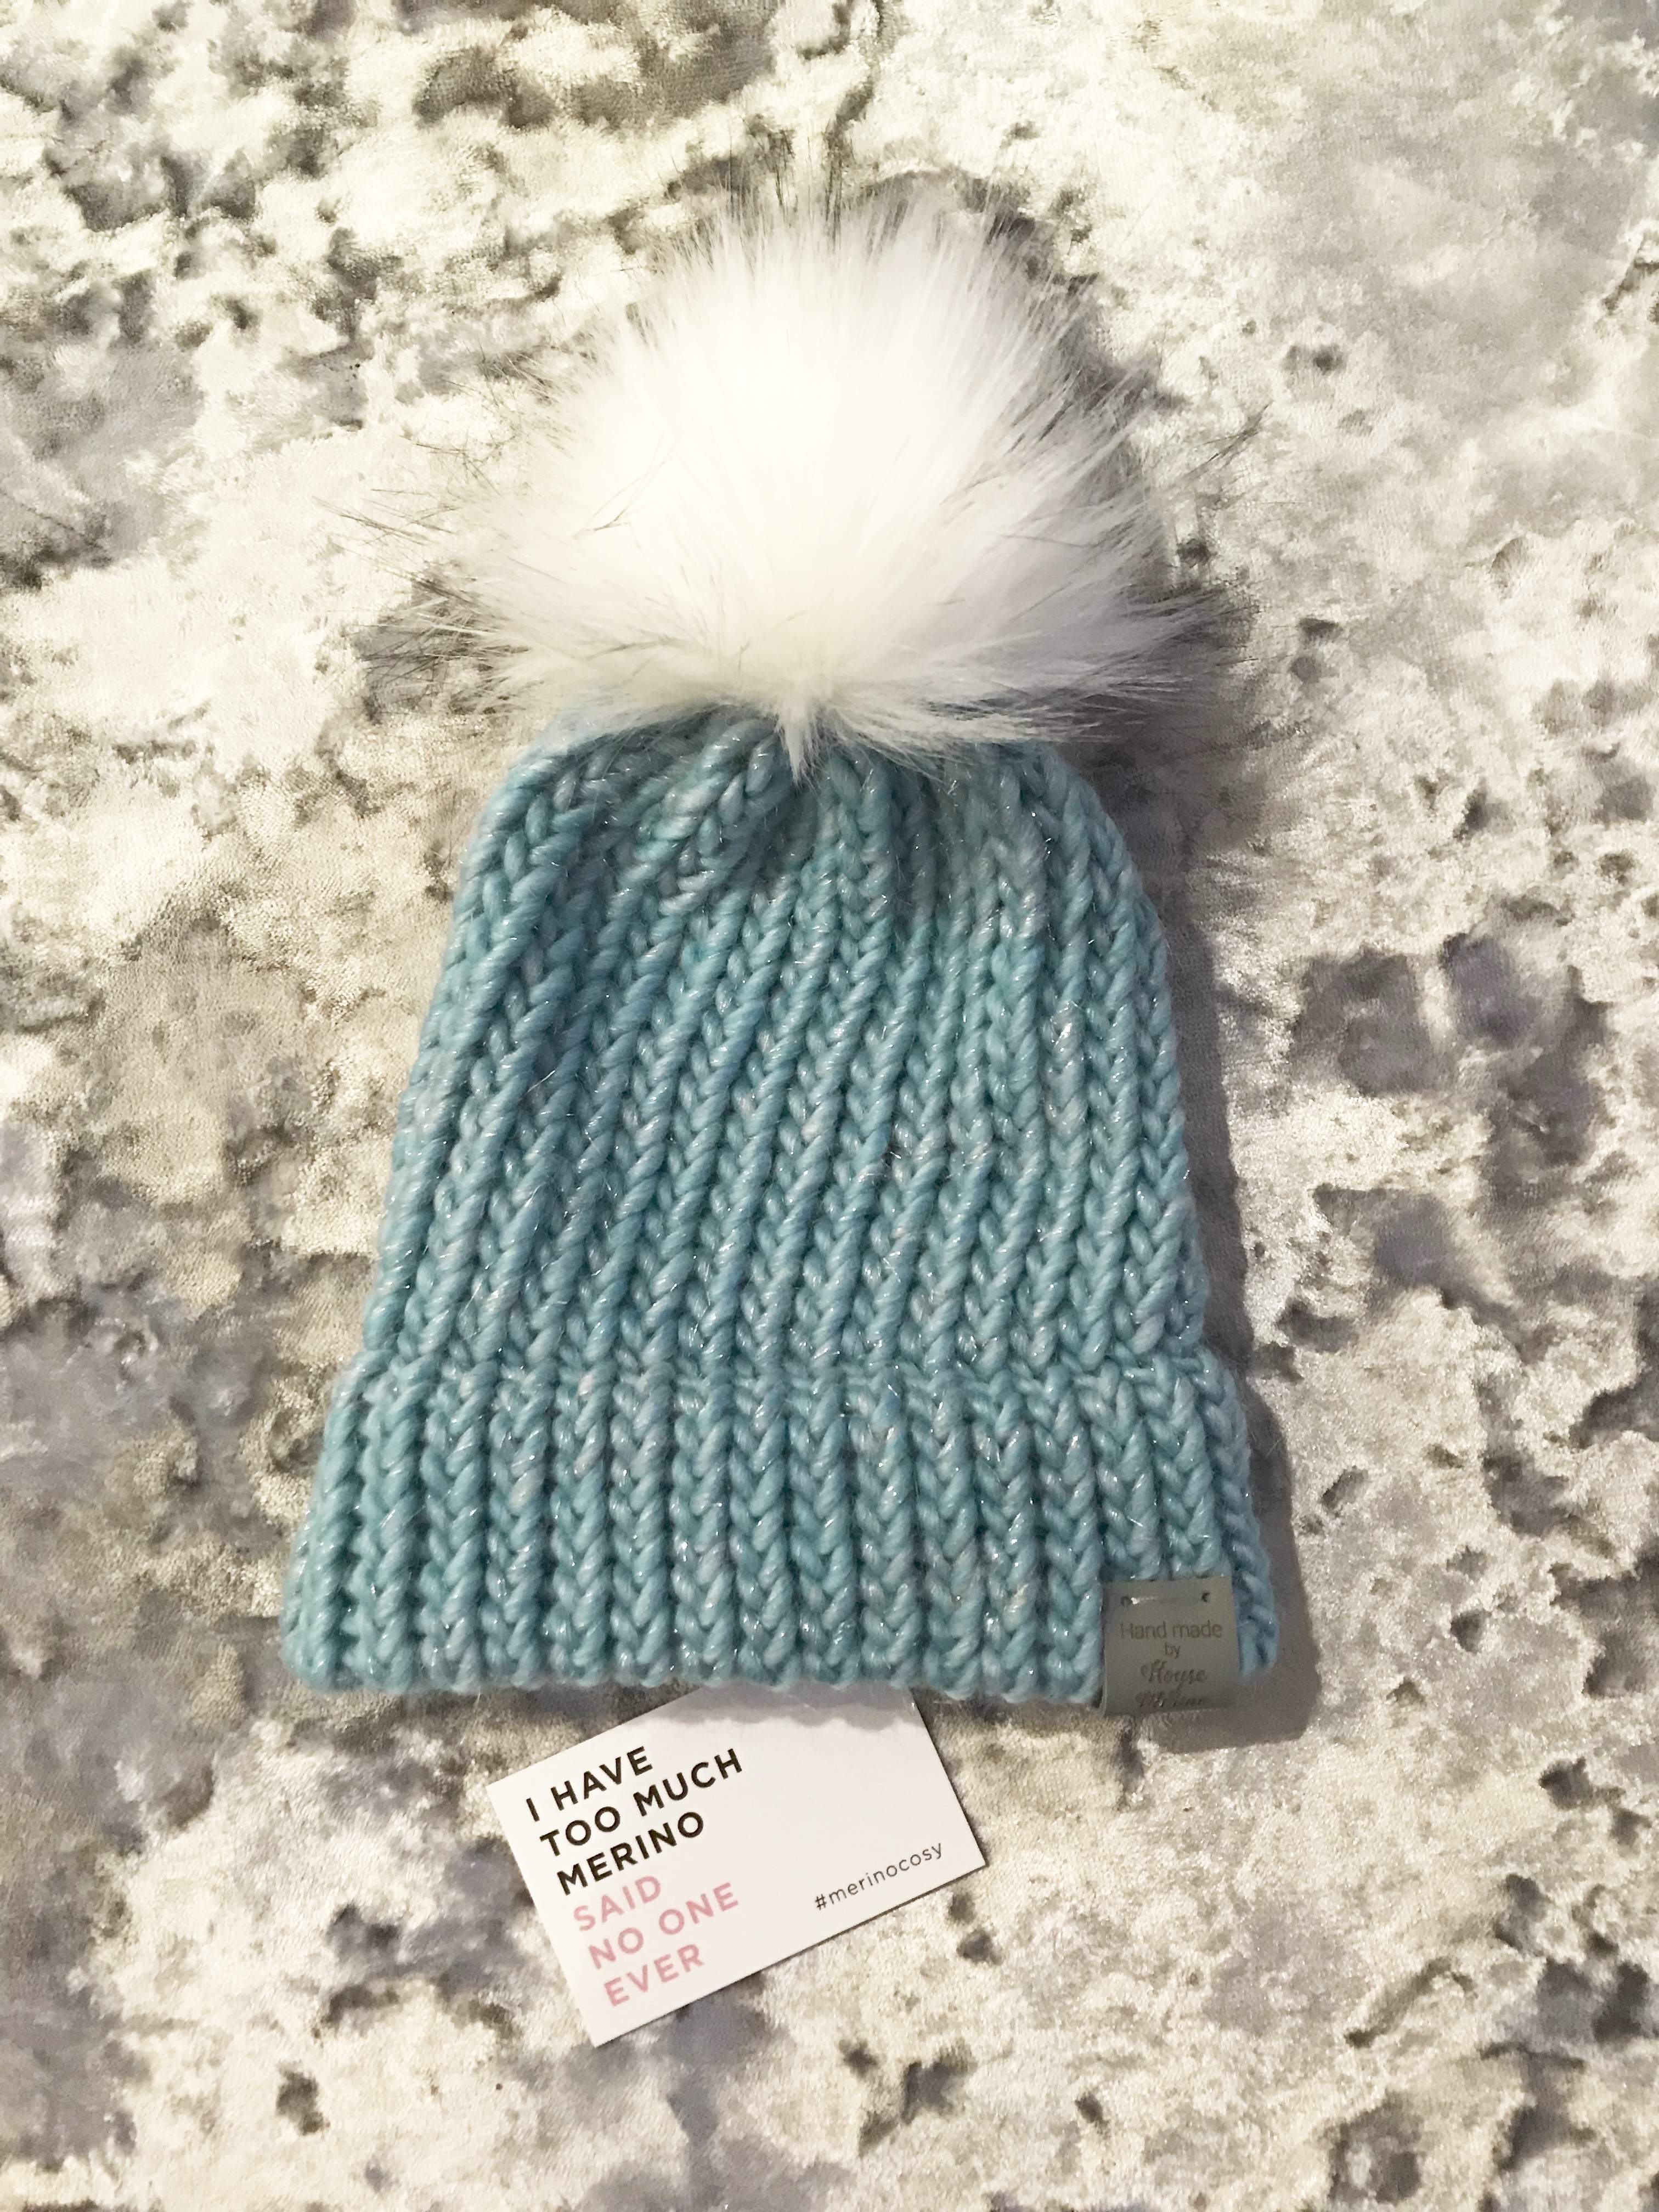 Merino hats - EXCLUSIVE  Worth melting for hats